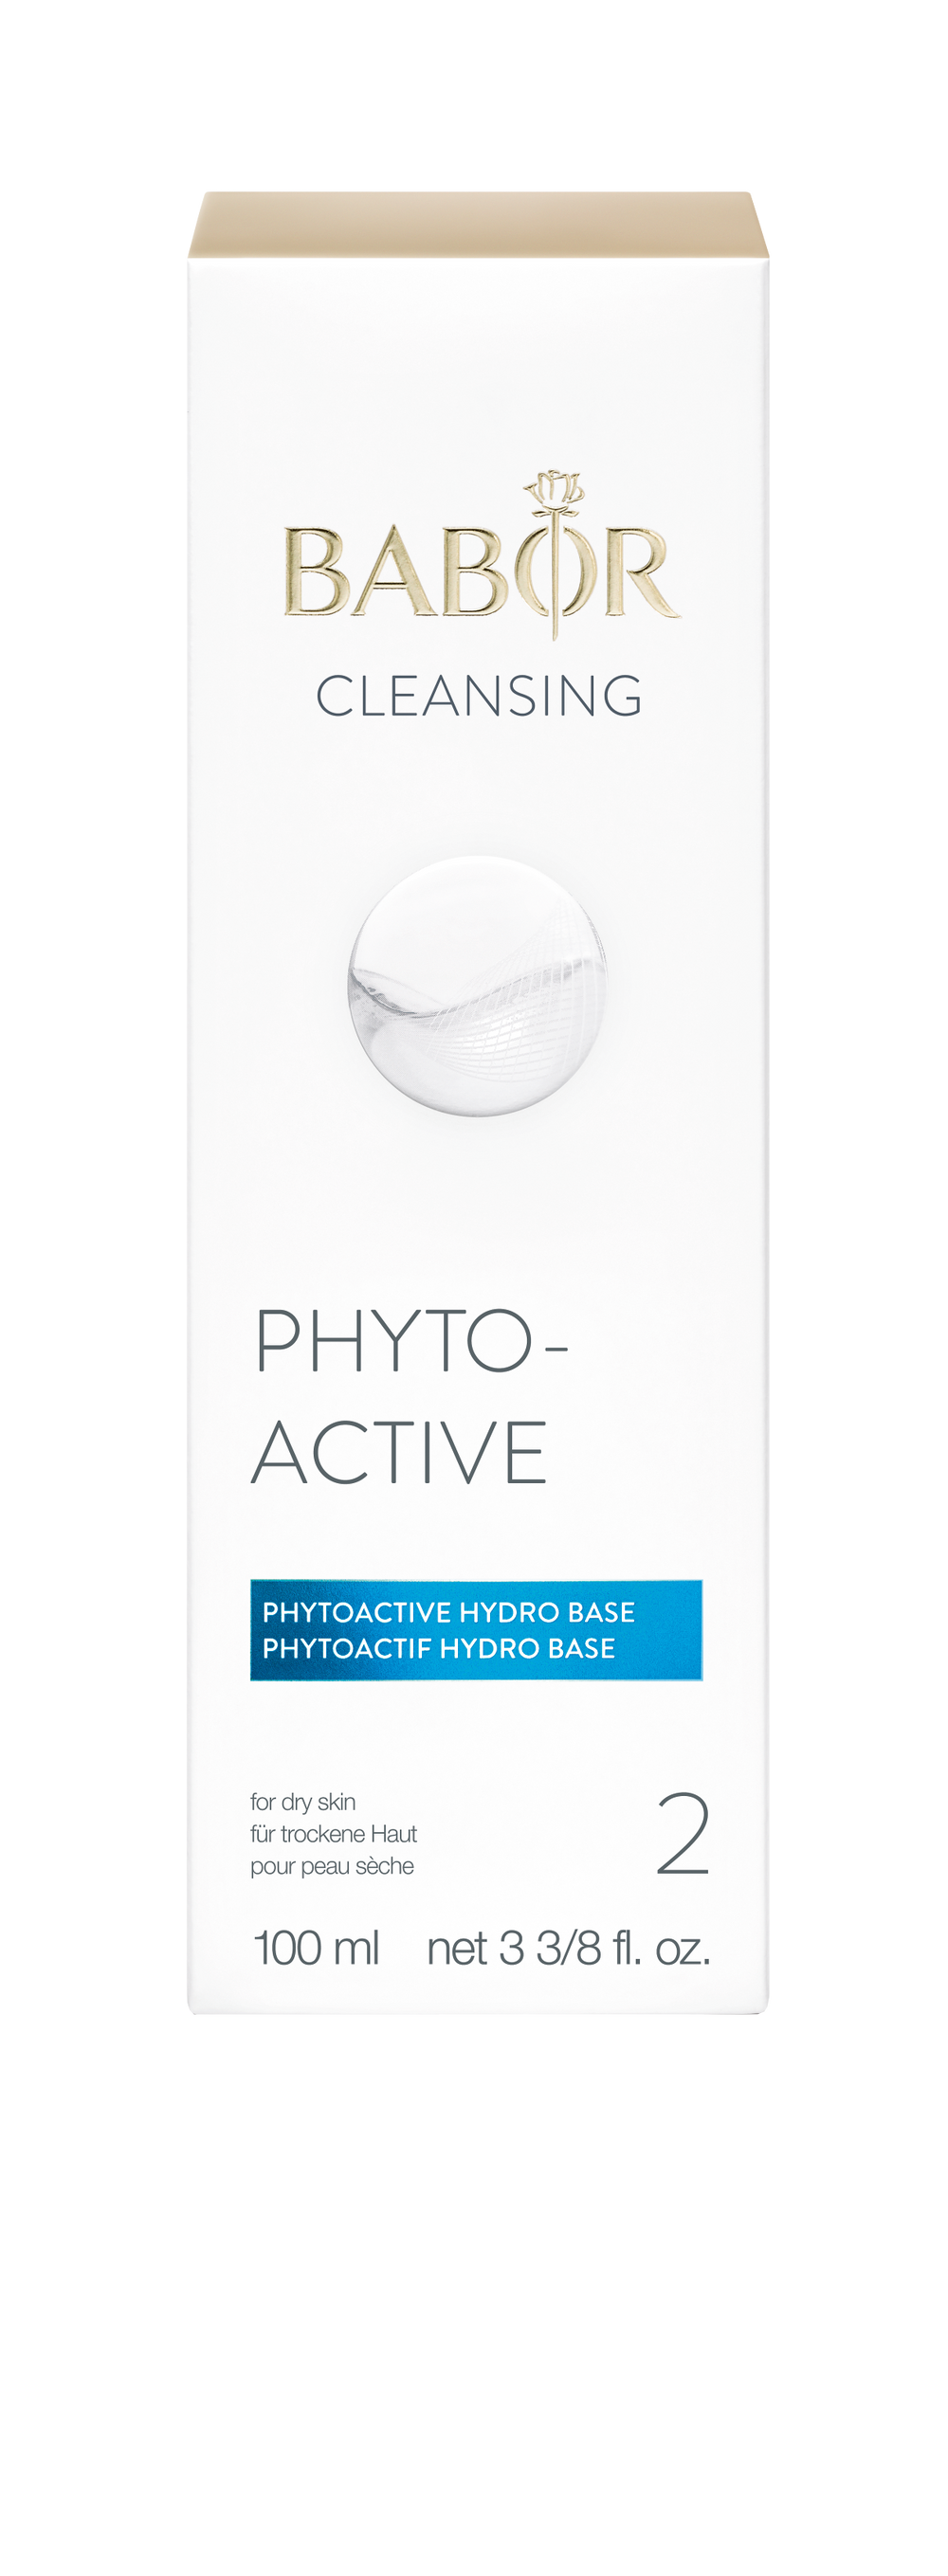 Phytoactive Hydro Base is part of a unique 2-step, deep action cleanser that combines the natural cleansing powers of water and oil to remove oil and water soluble products thoroughly, yet gently.  Phytoactive Hydro Base was designed to treat, refresh, and lend radiance to the skin while you cleanse. Phytoactive Hydro Base is the 2nd Step in our bi-phase cleansing system (1st step HY-ÖL sold separately).